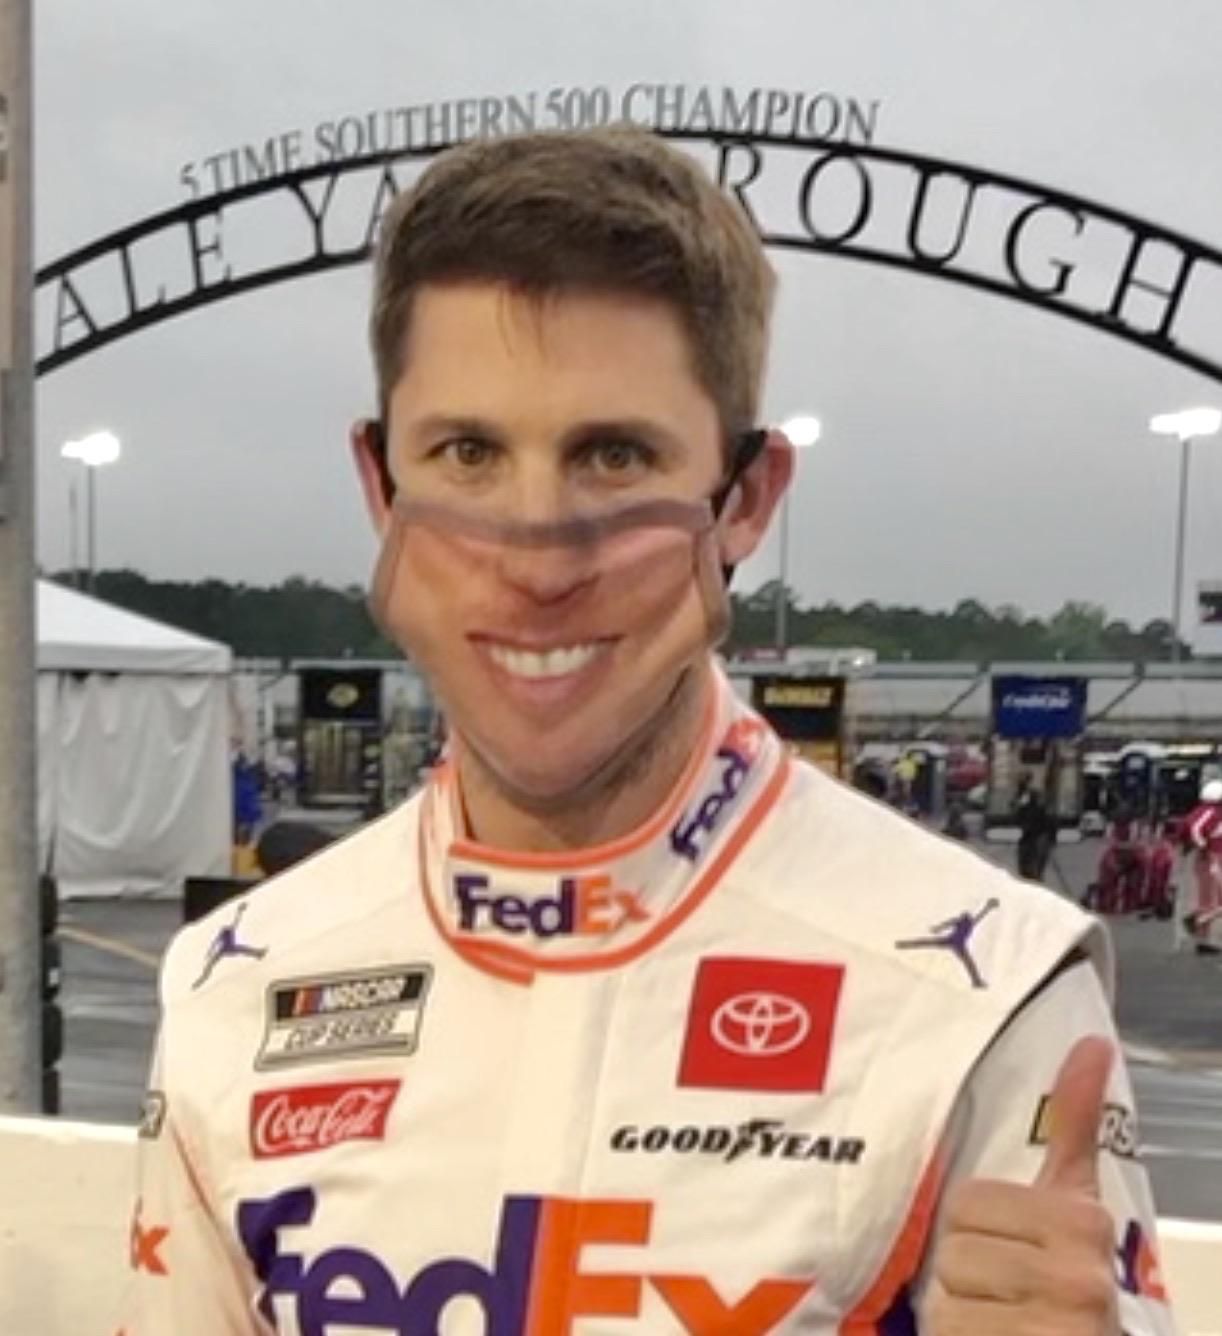 NASCAR driver Denny Hamlin wears a mask with his own face on it, before the race.